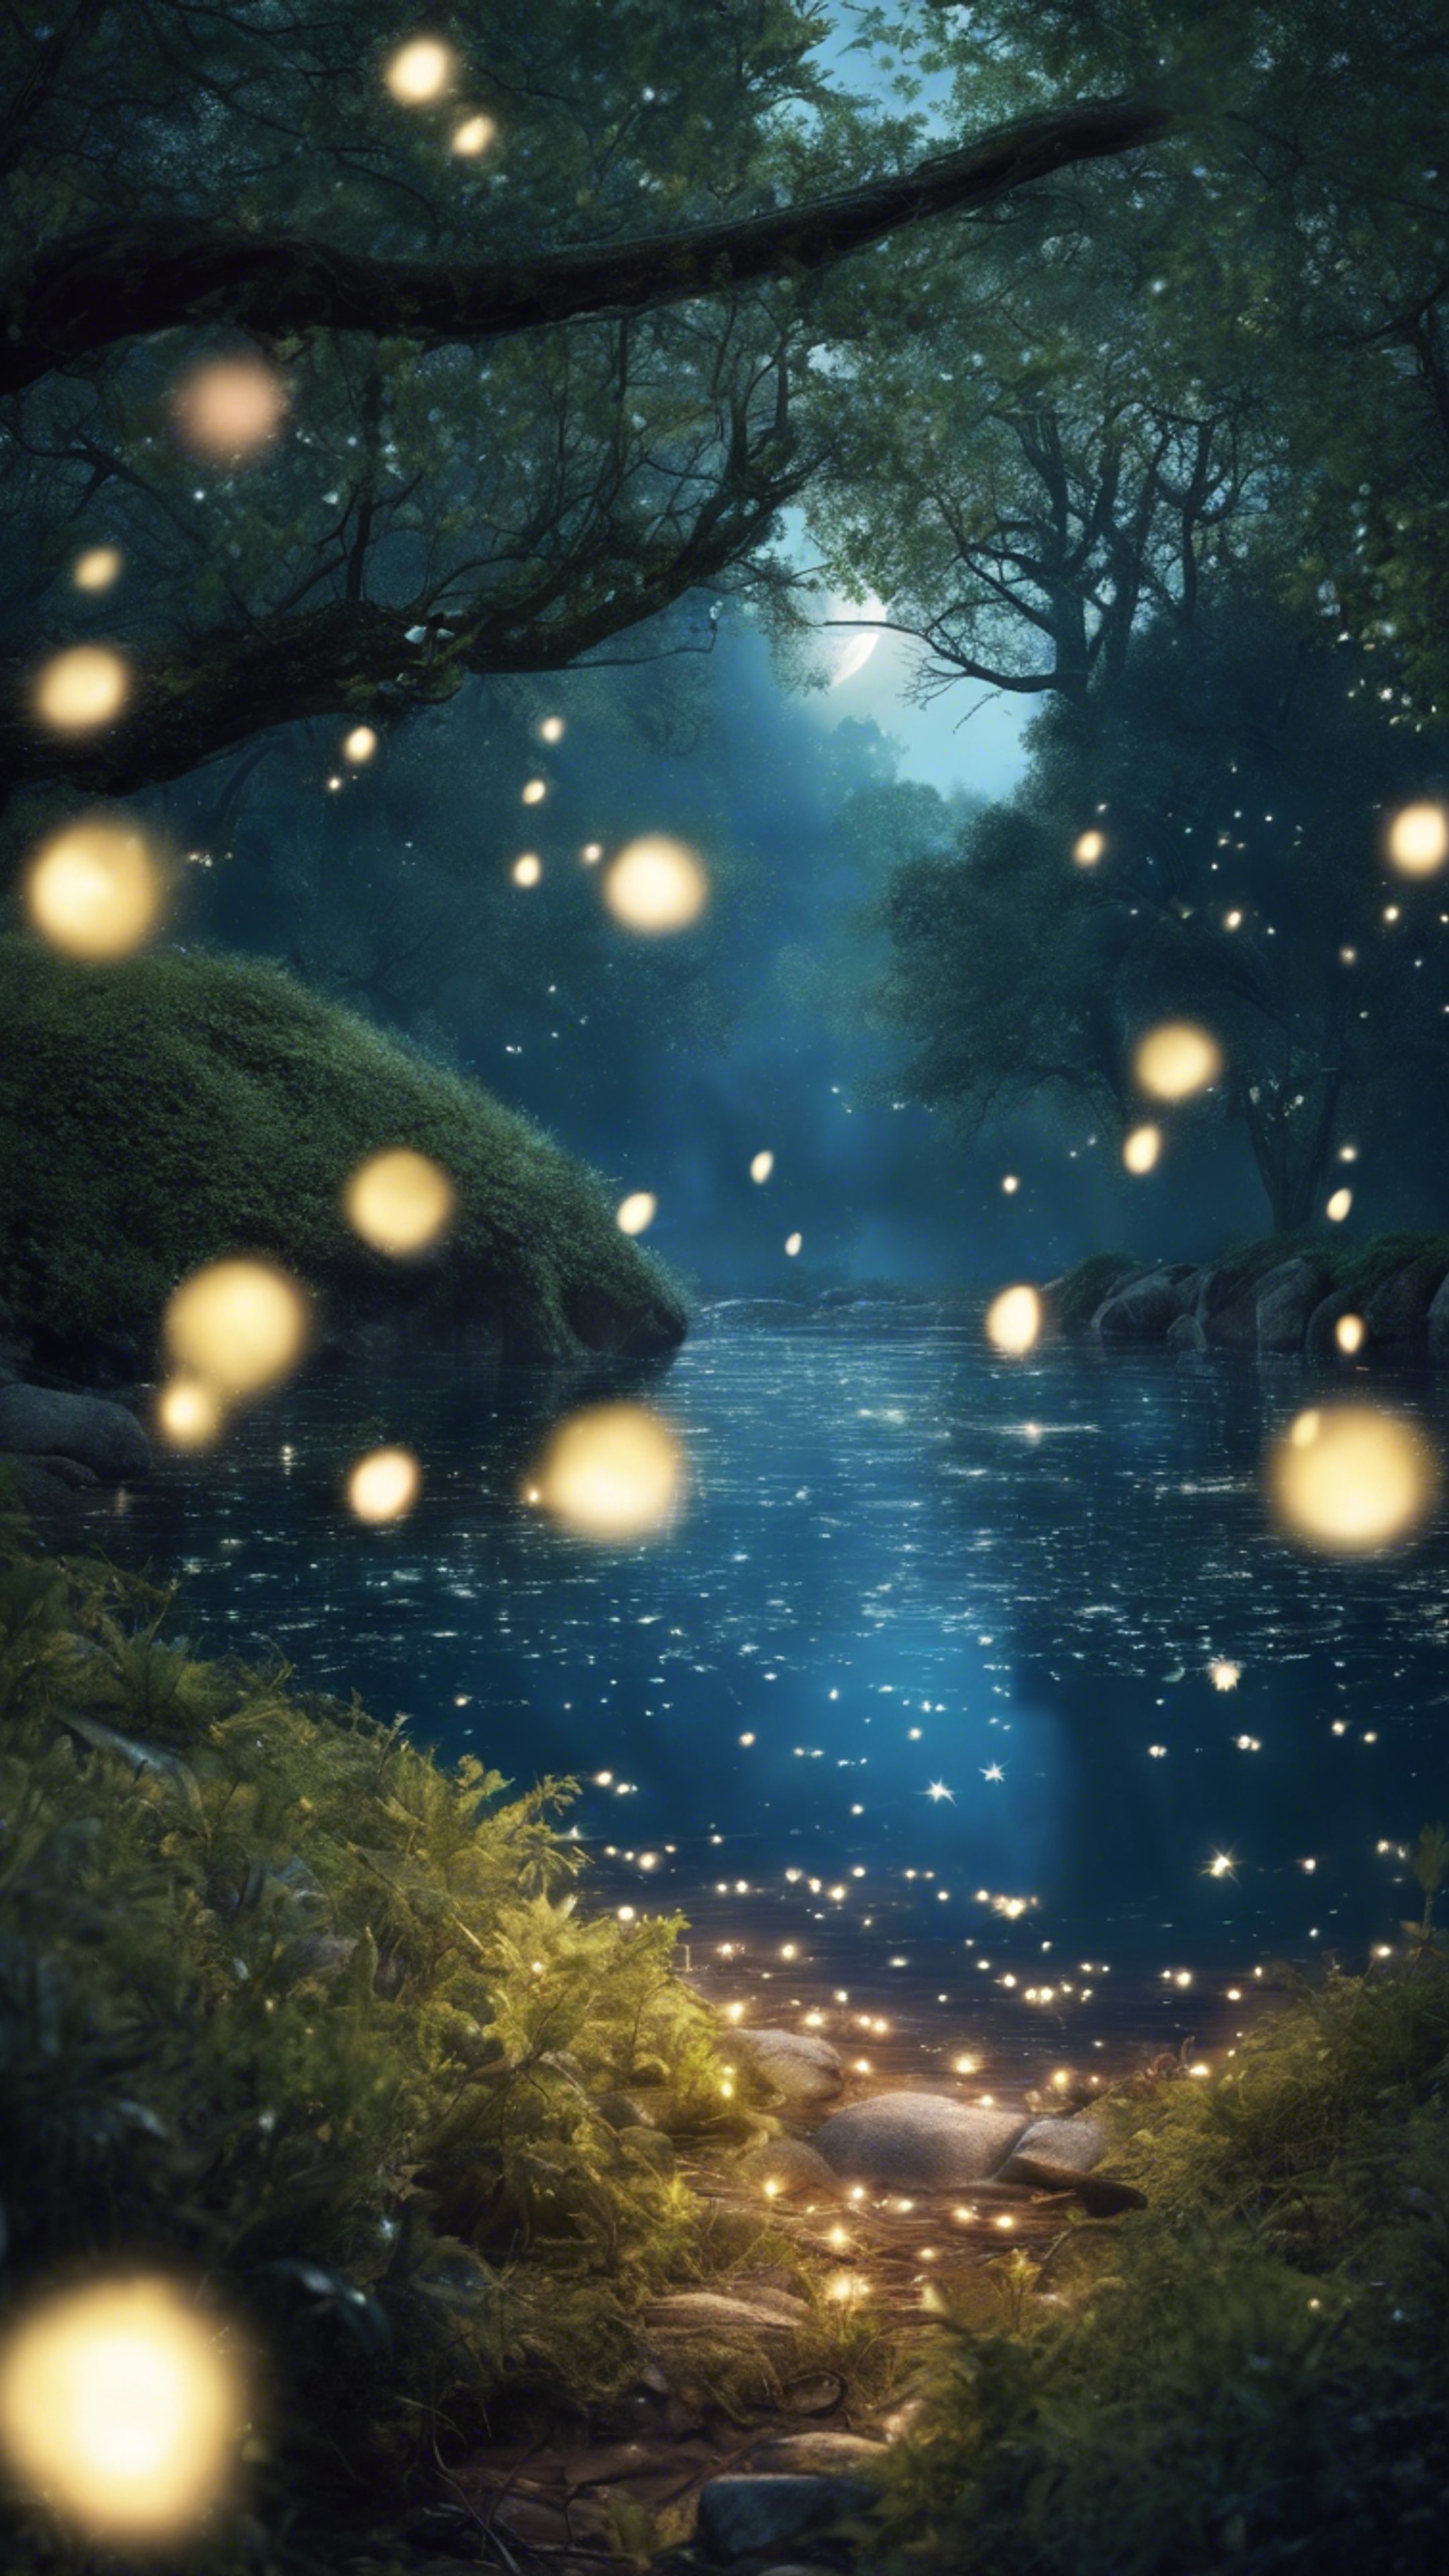 An enchanted forest lit up by midnight blue fireflies, with a river gleaming under the silver moon. Tapeta[9c93675377644e8e8e21]